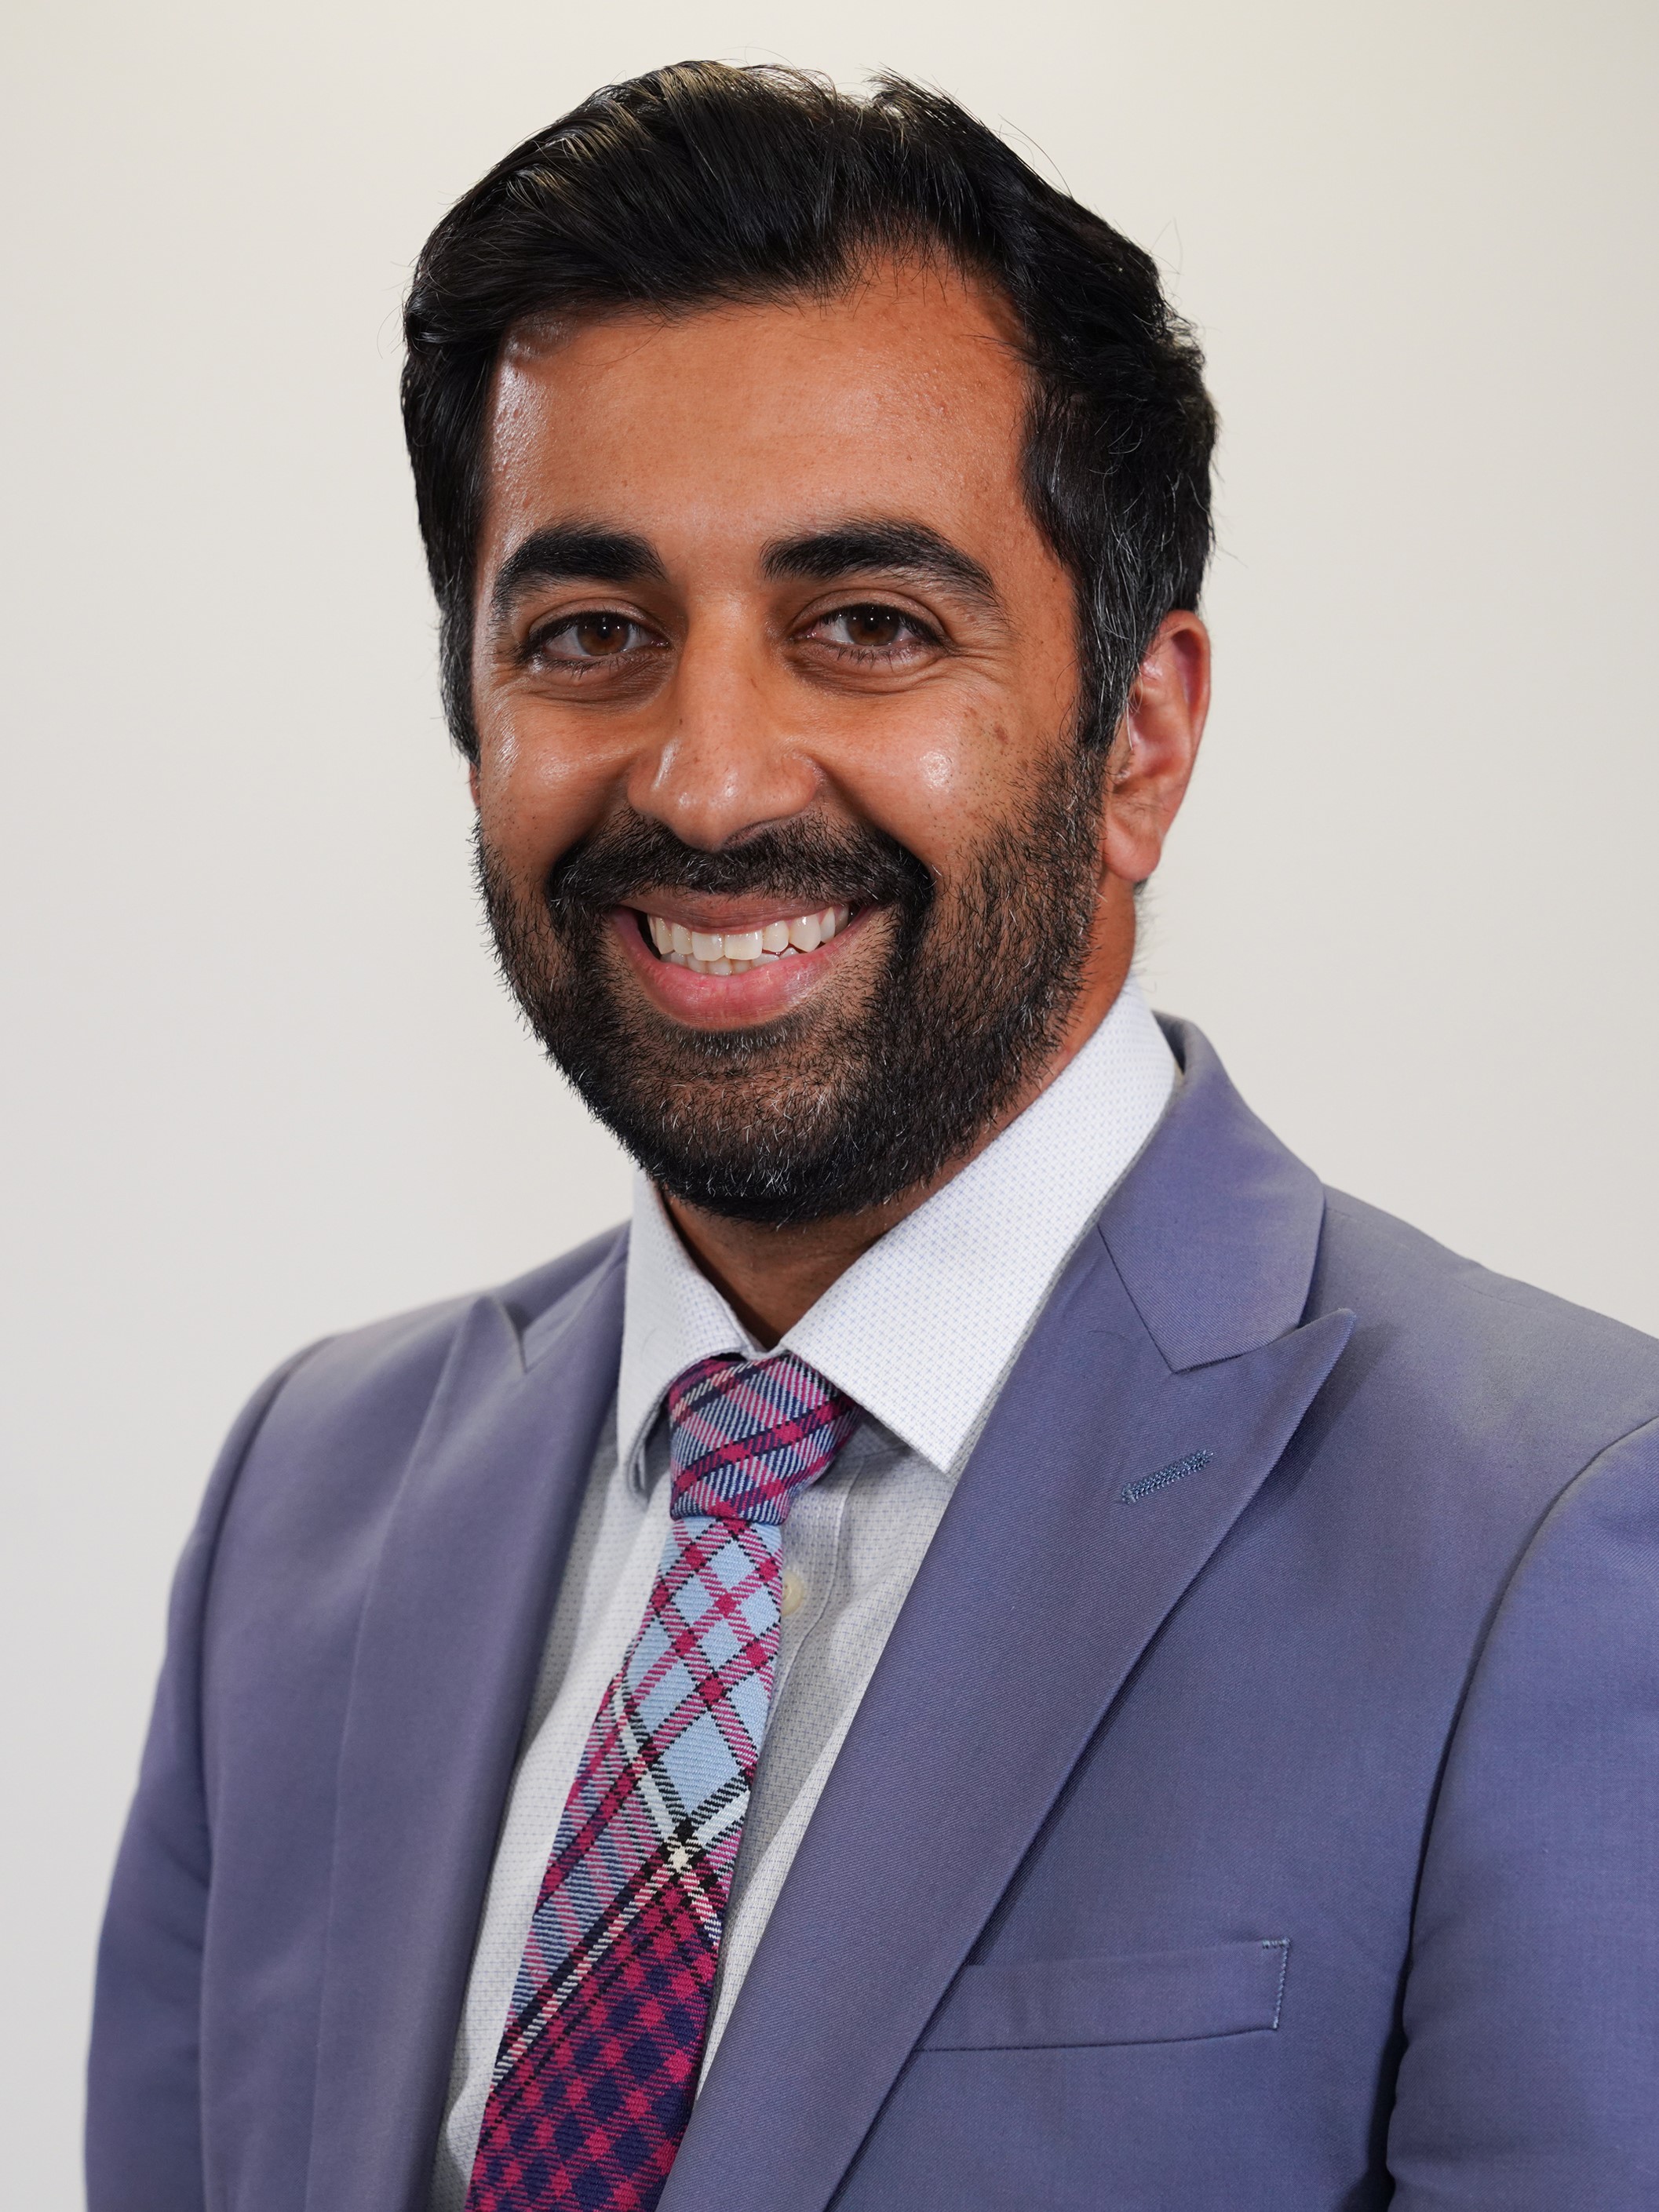 Humza Yousaf: Scotland gets a Muslim leader in a moment of extraordinary change for British politics